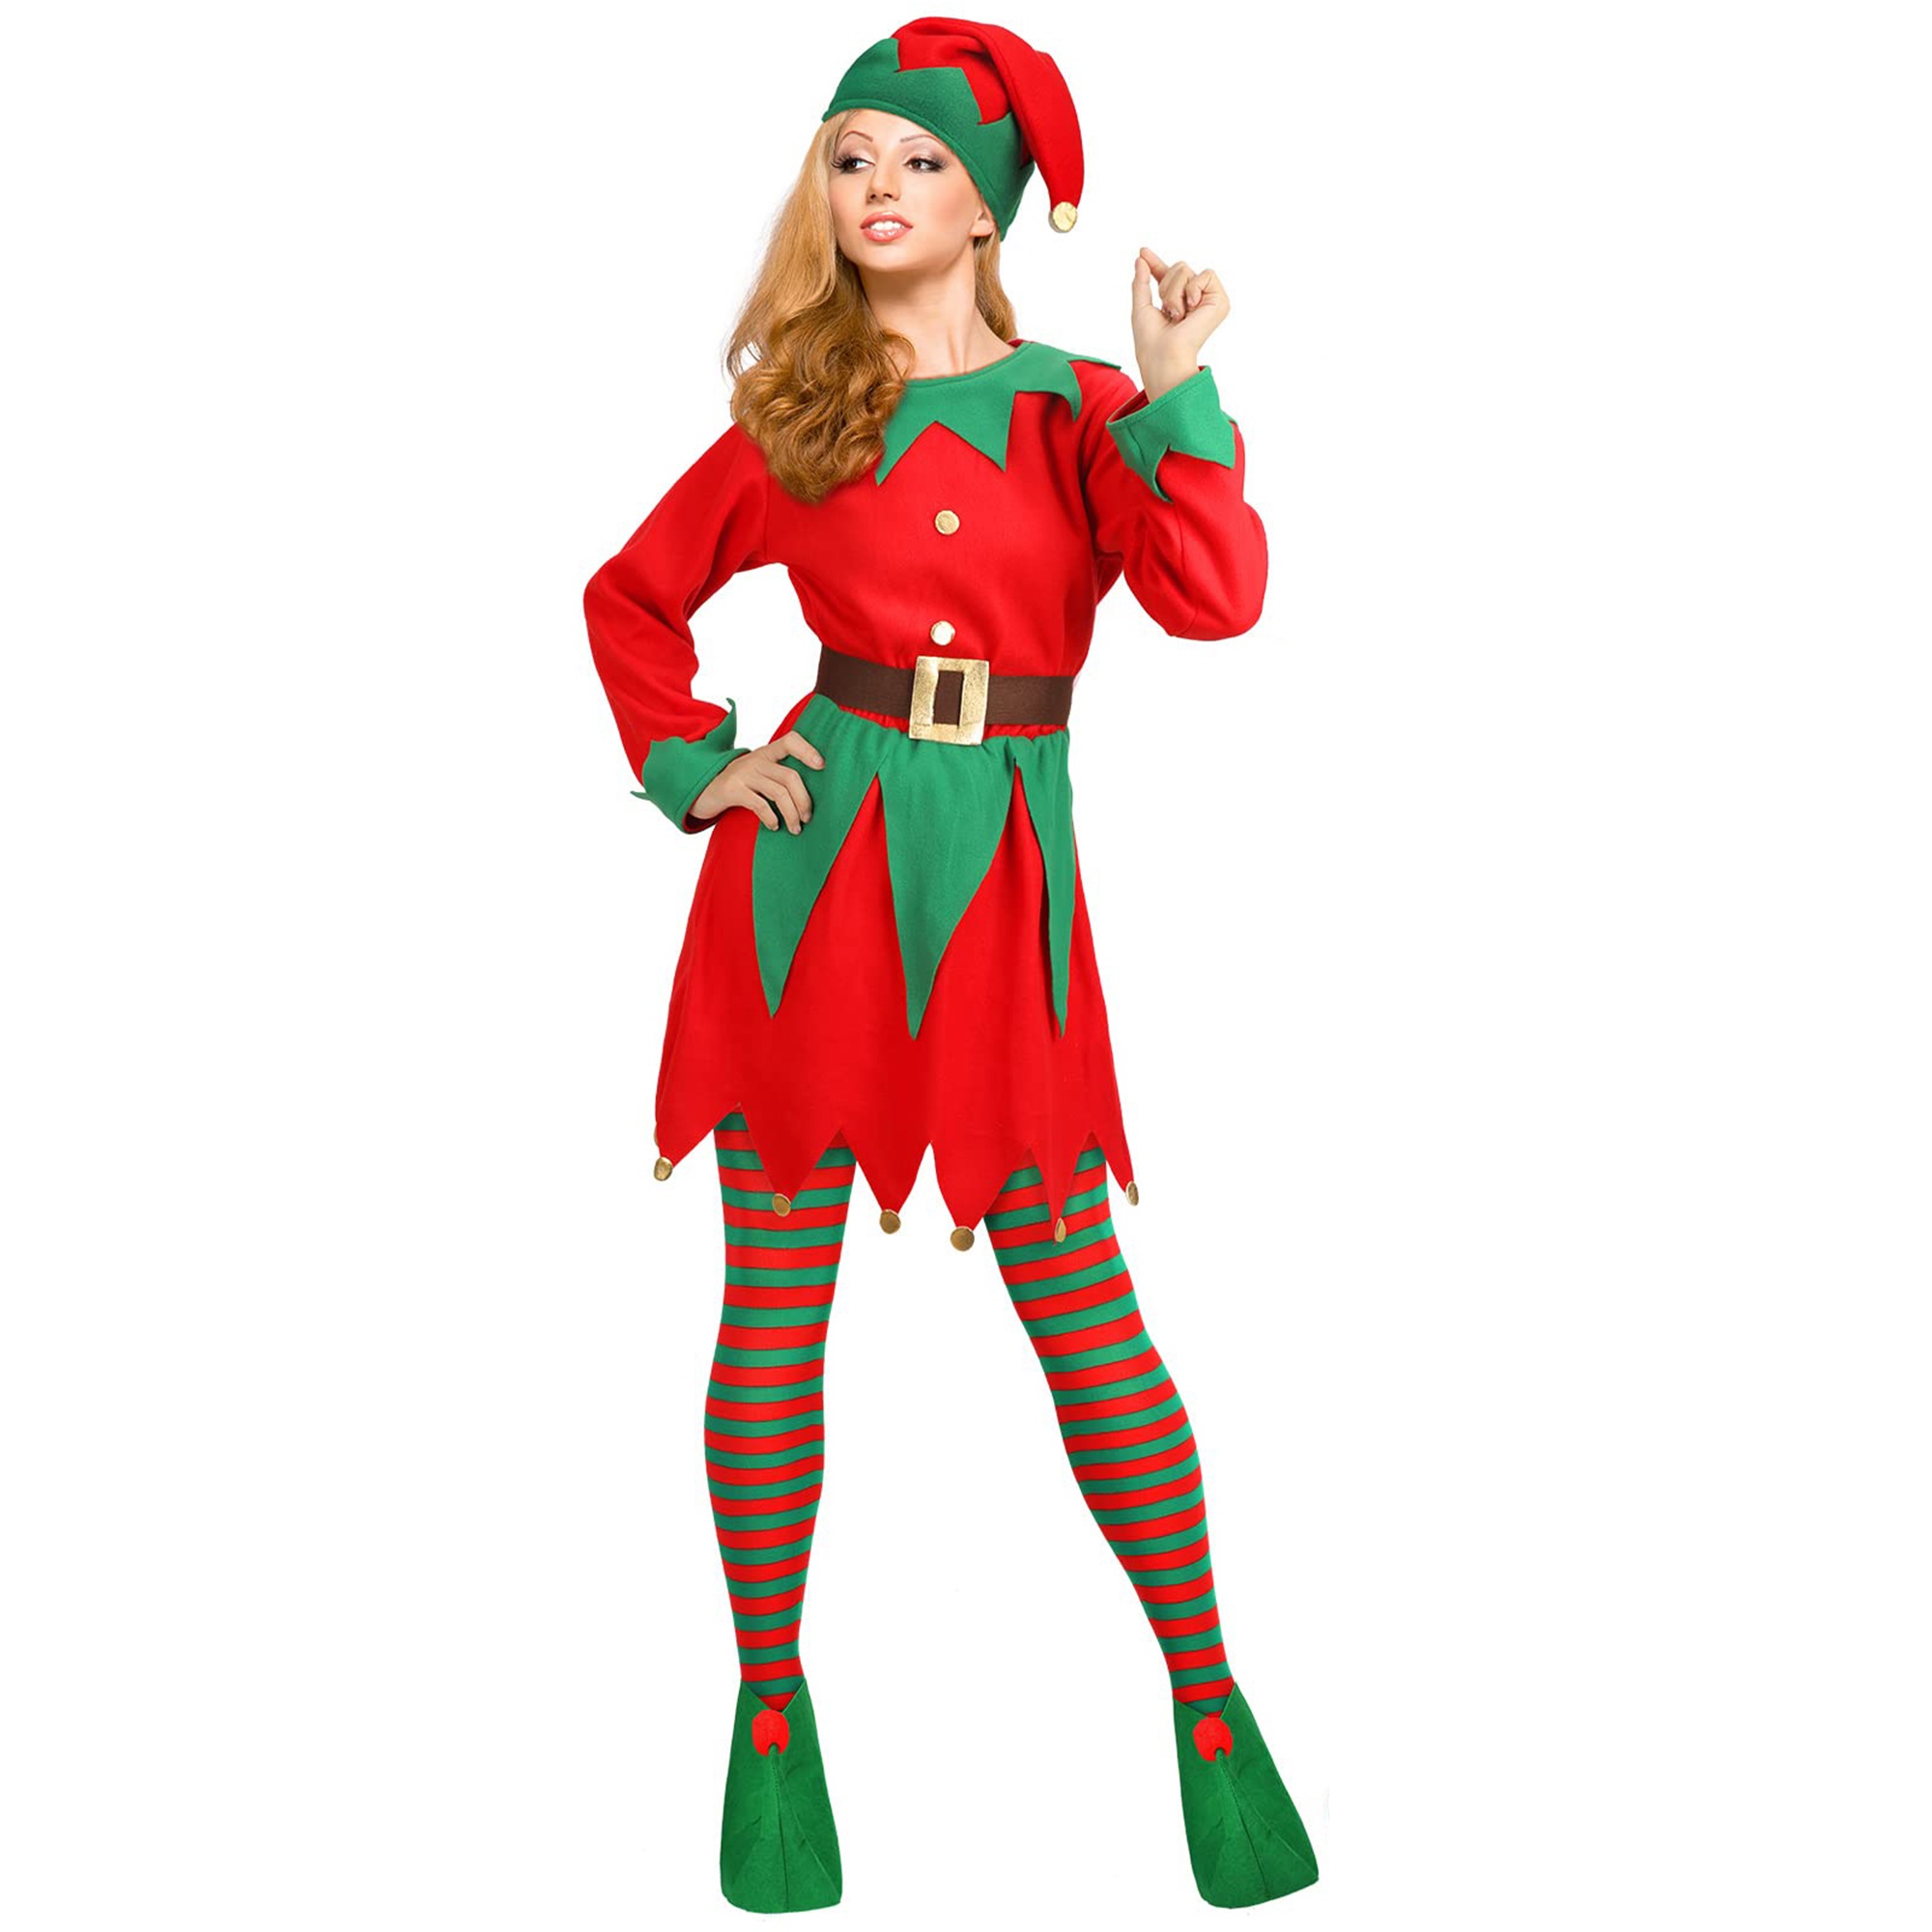 Douhoow Women Christmas Elf Girl Costume, Long Sleeve Dress+Hat+Shoes+Striped Stockings - image 1 of 9